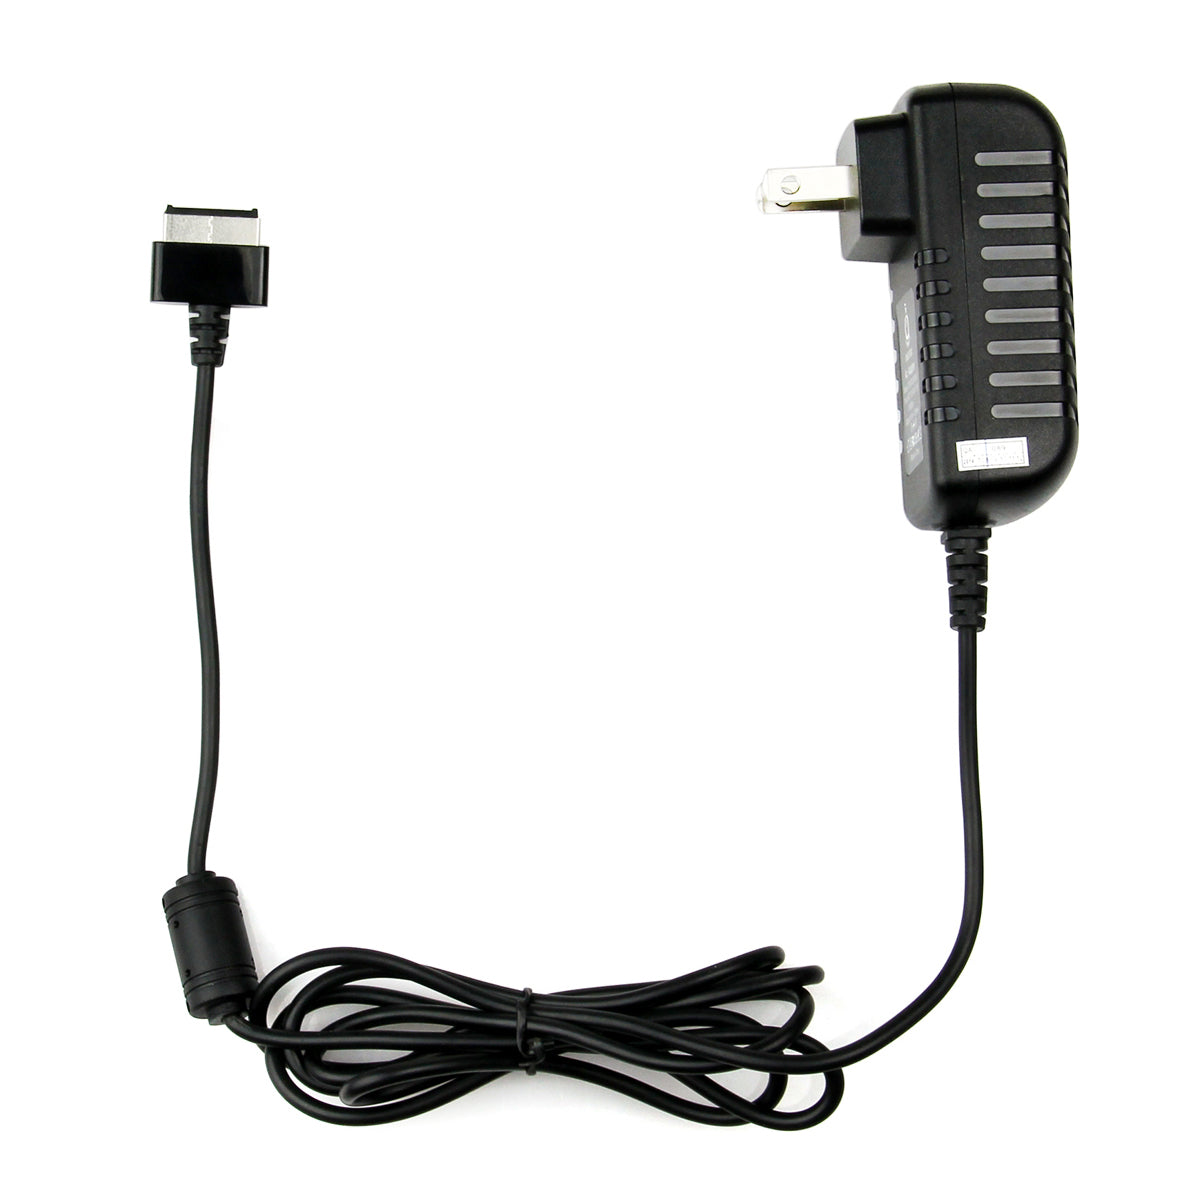 AC Adapter Charger for ASUS TF201 B2 Eee Pad.